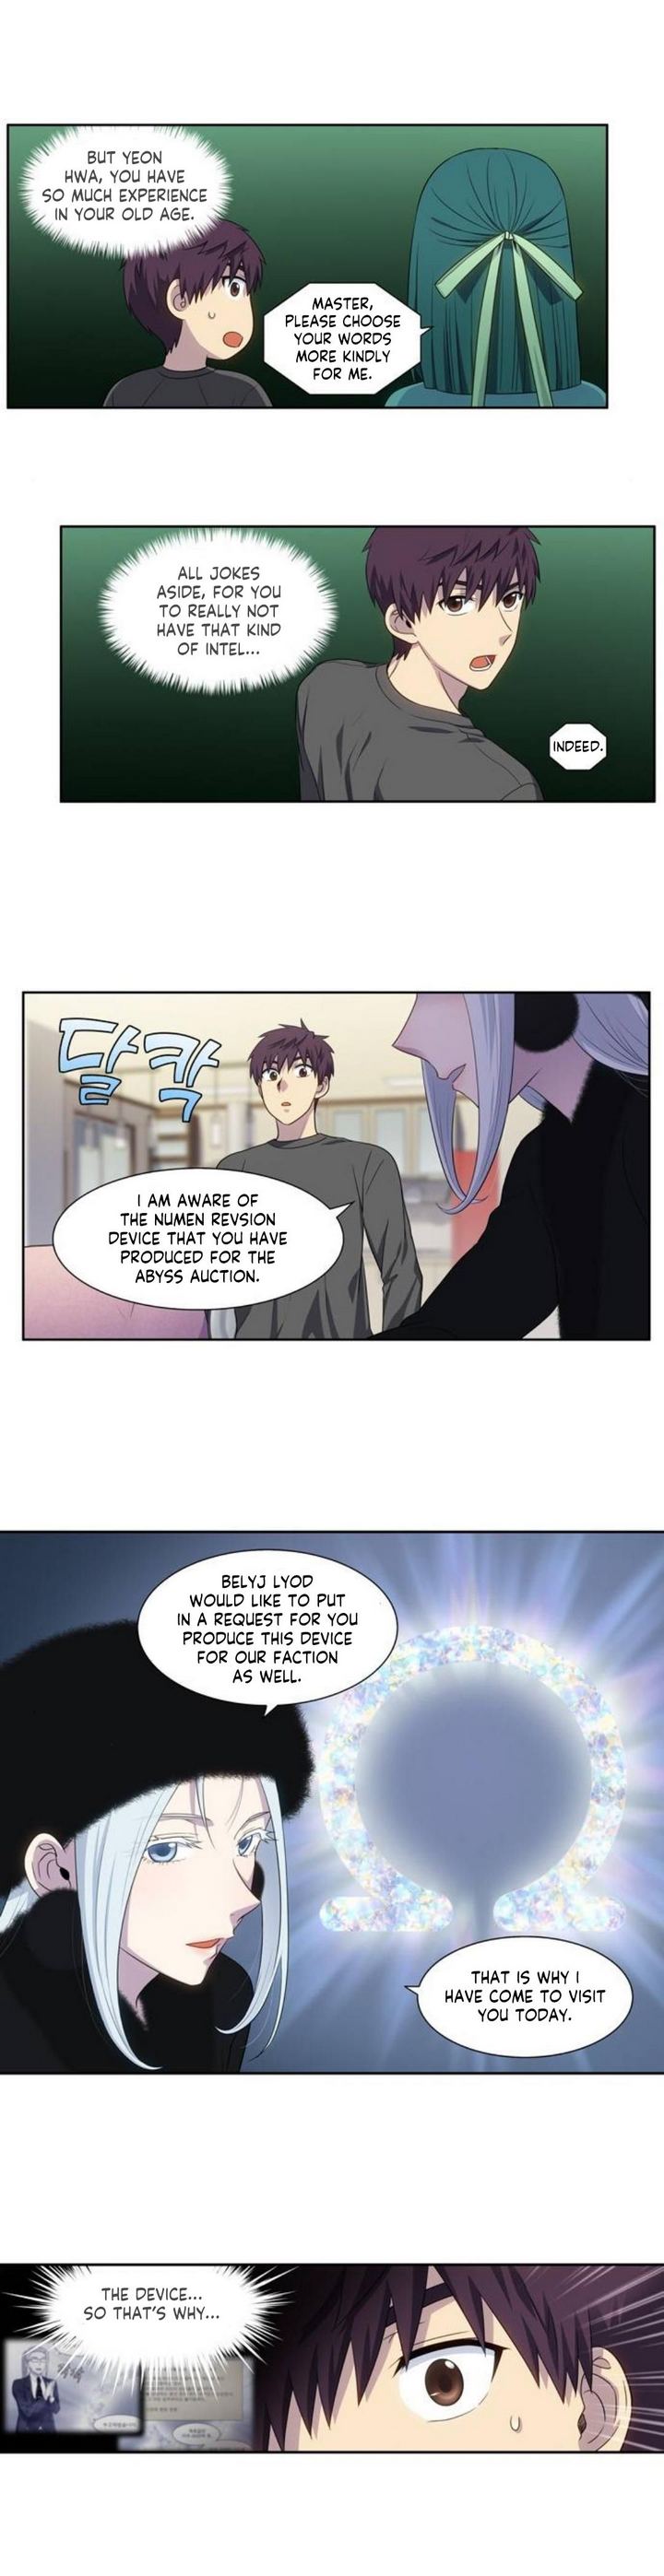 The Gamer - Chapter 359 Page 8